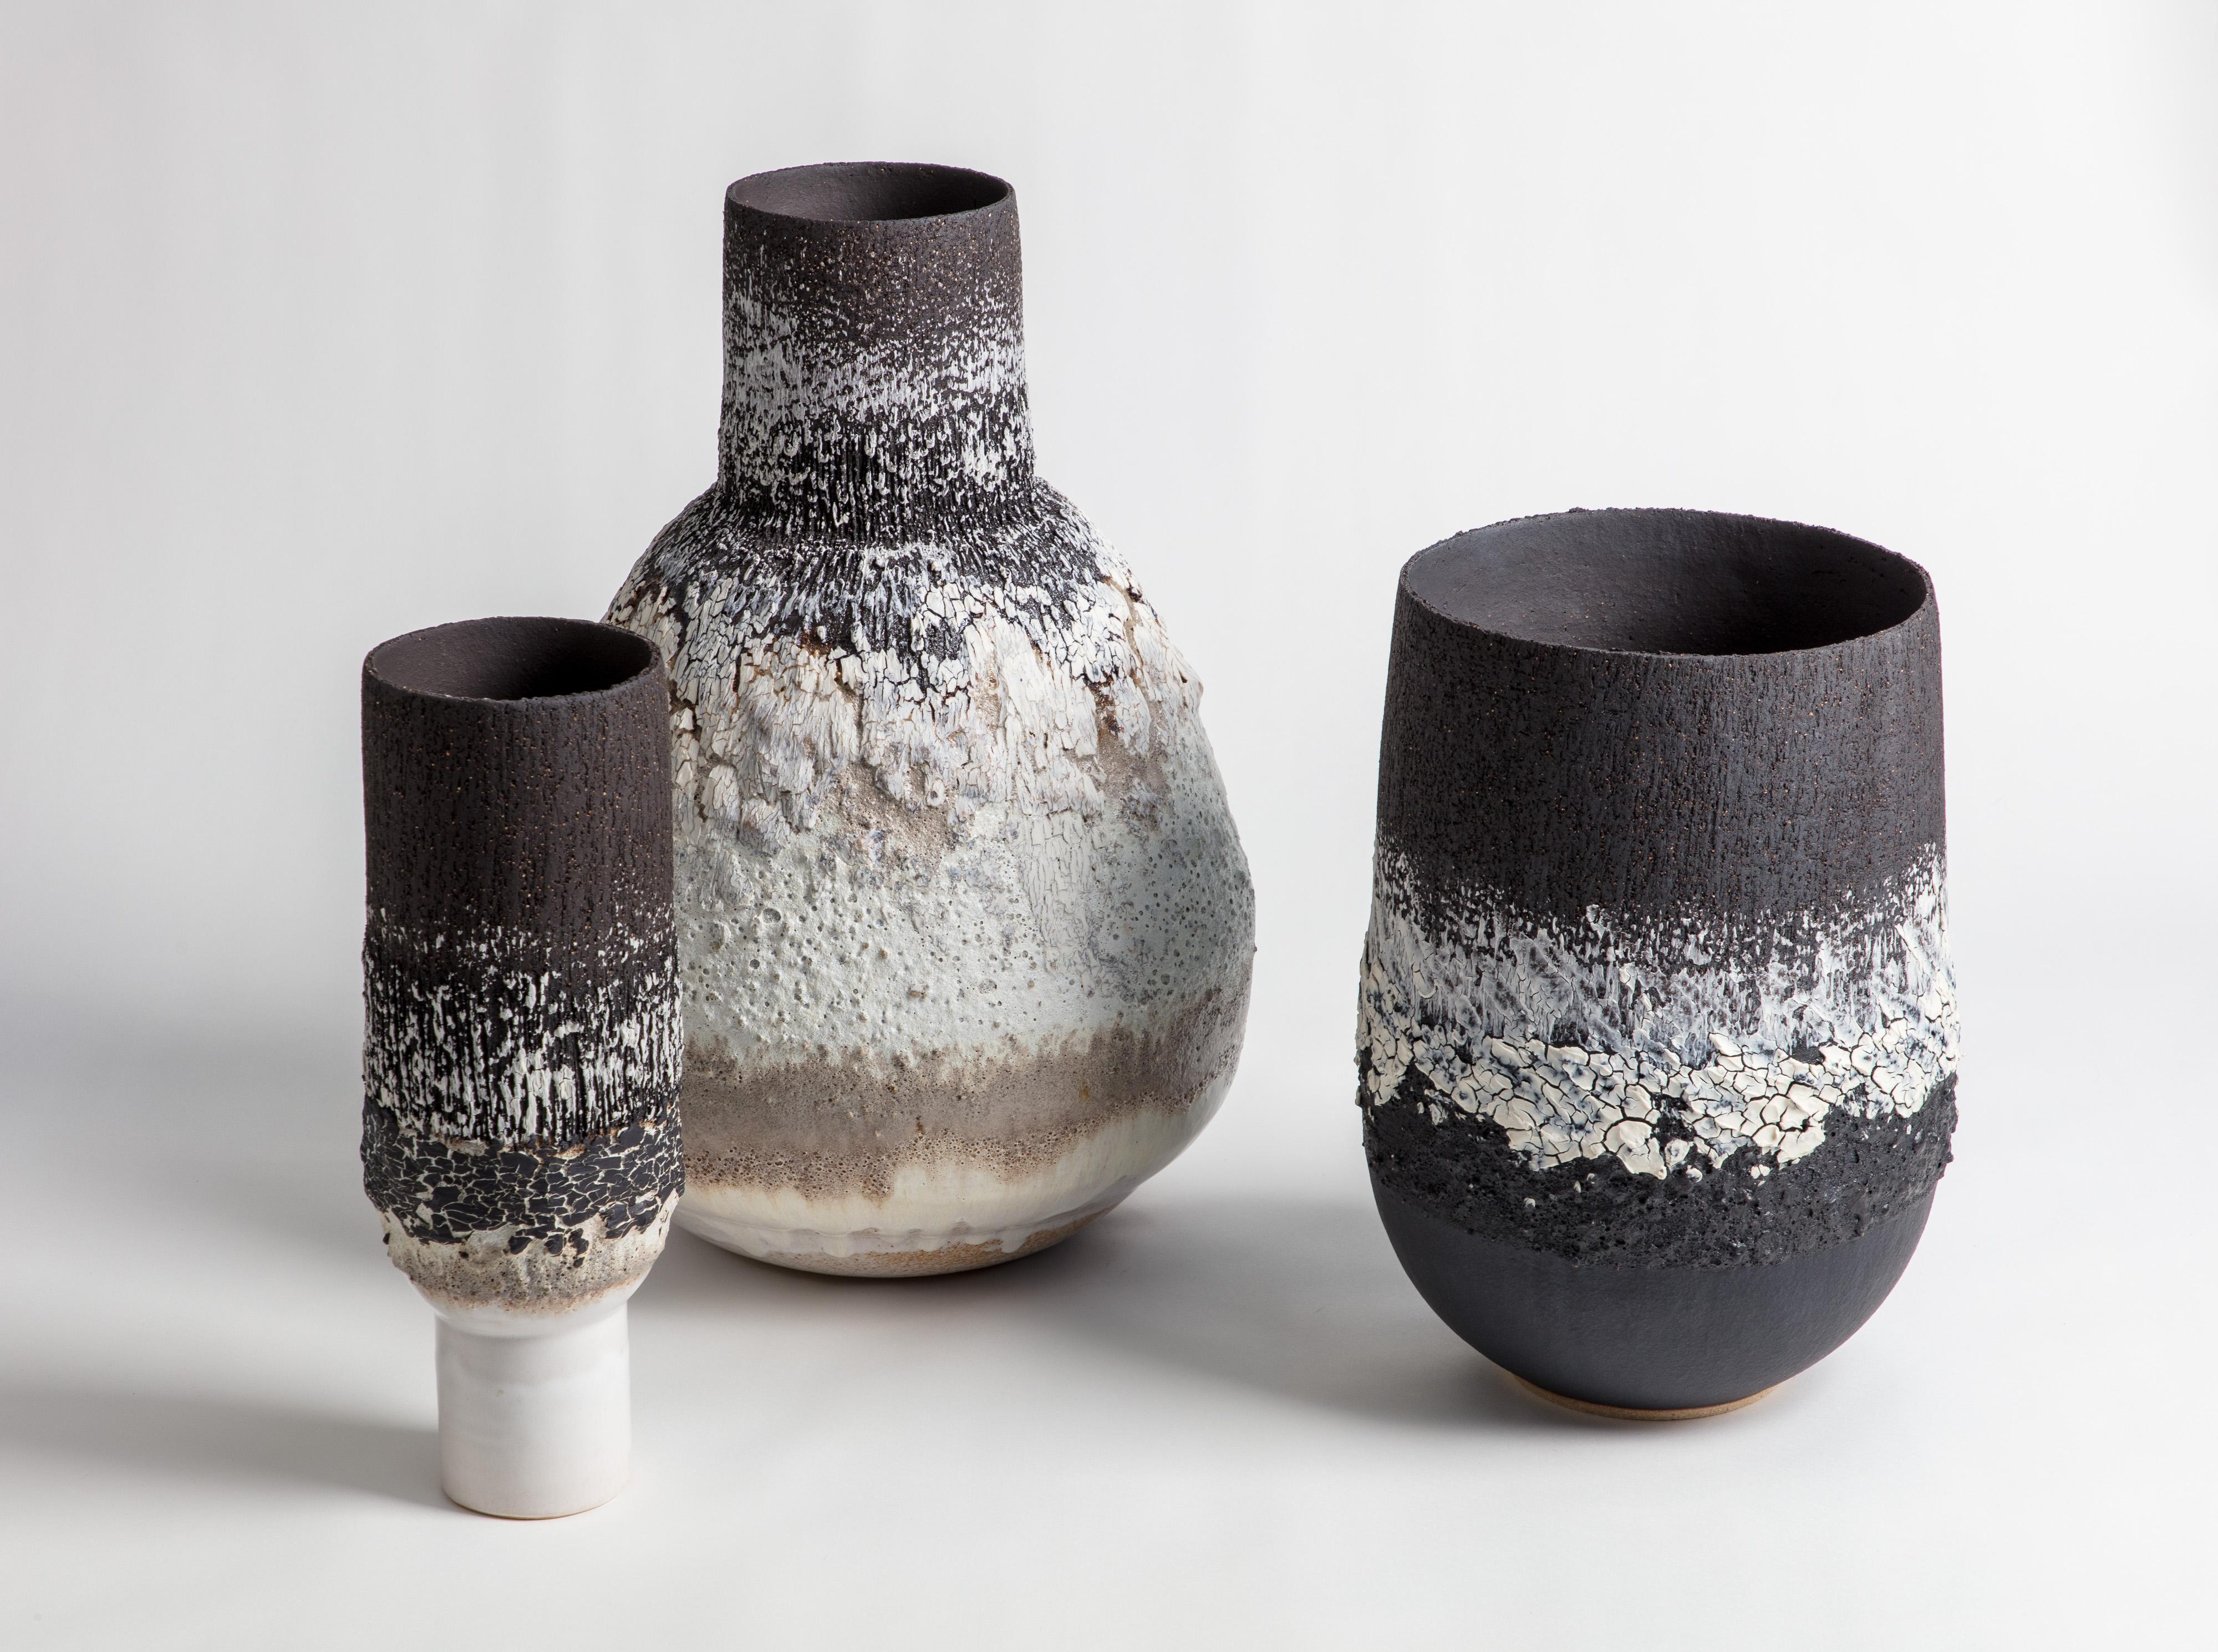 A large bubble texture open vessel with black and white glaze and markings. Made from black textured stoneware clay and porcelain engobe.

Inspiration for the piece comes from the clay itself and the chemical relationships that glaze and volcanic